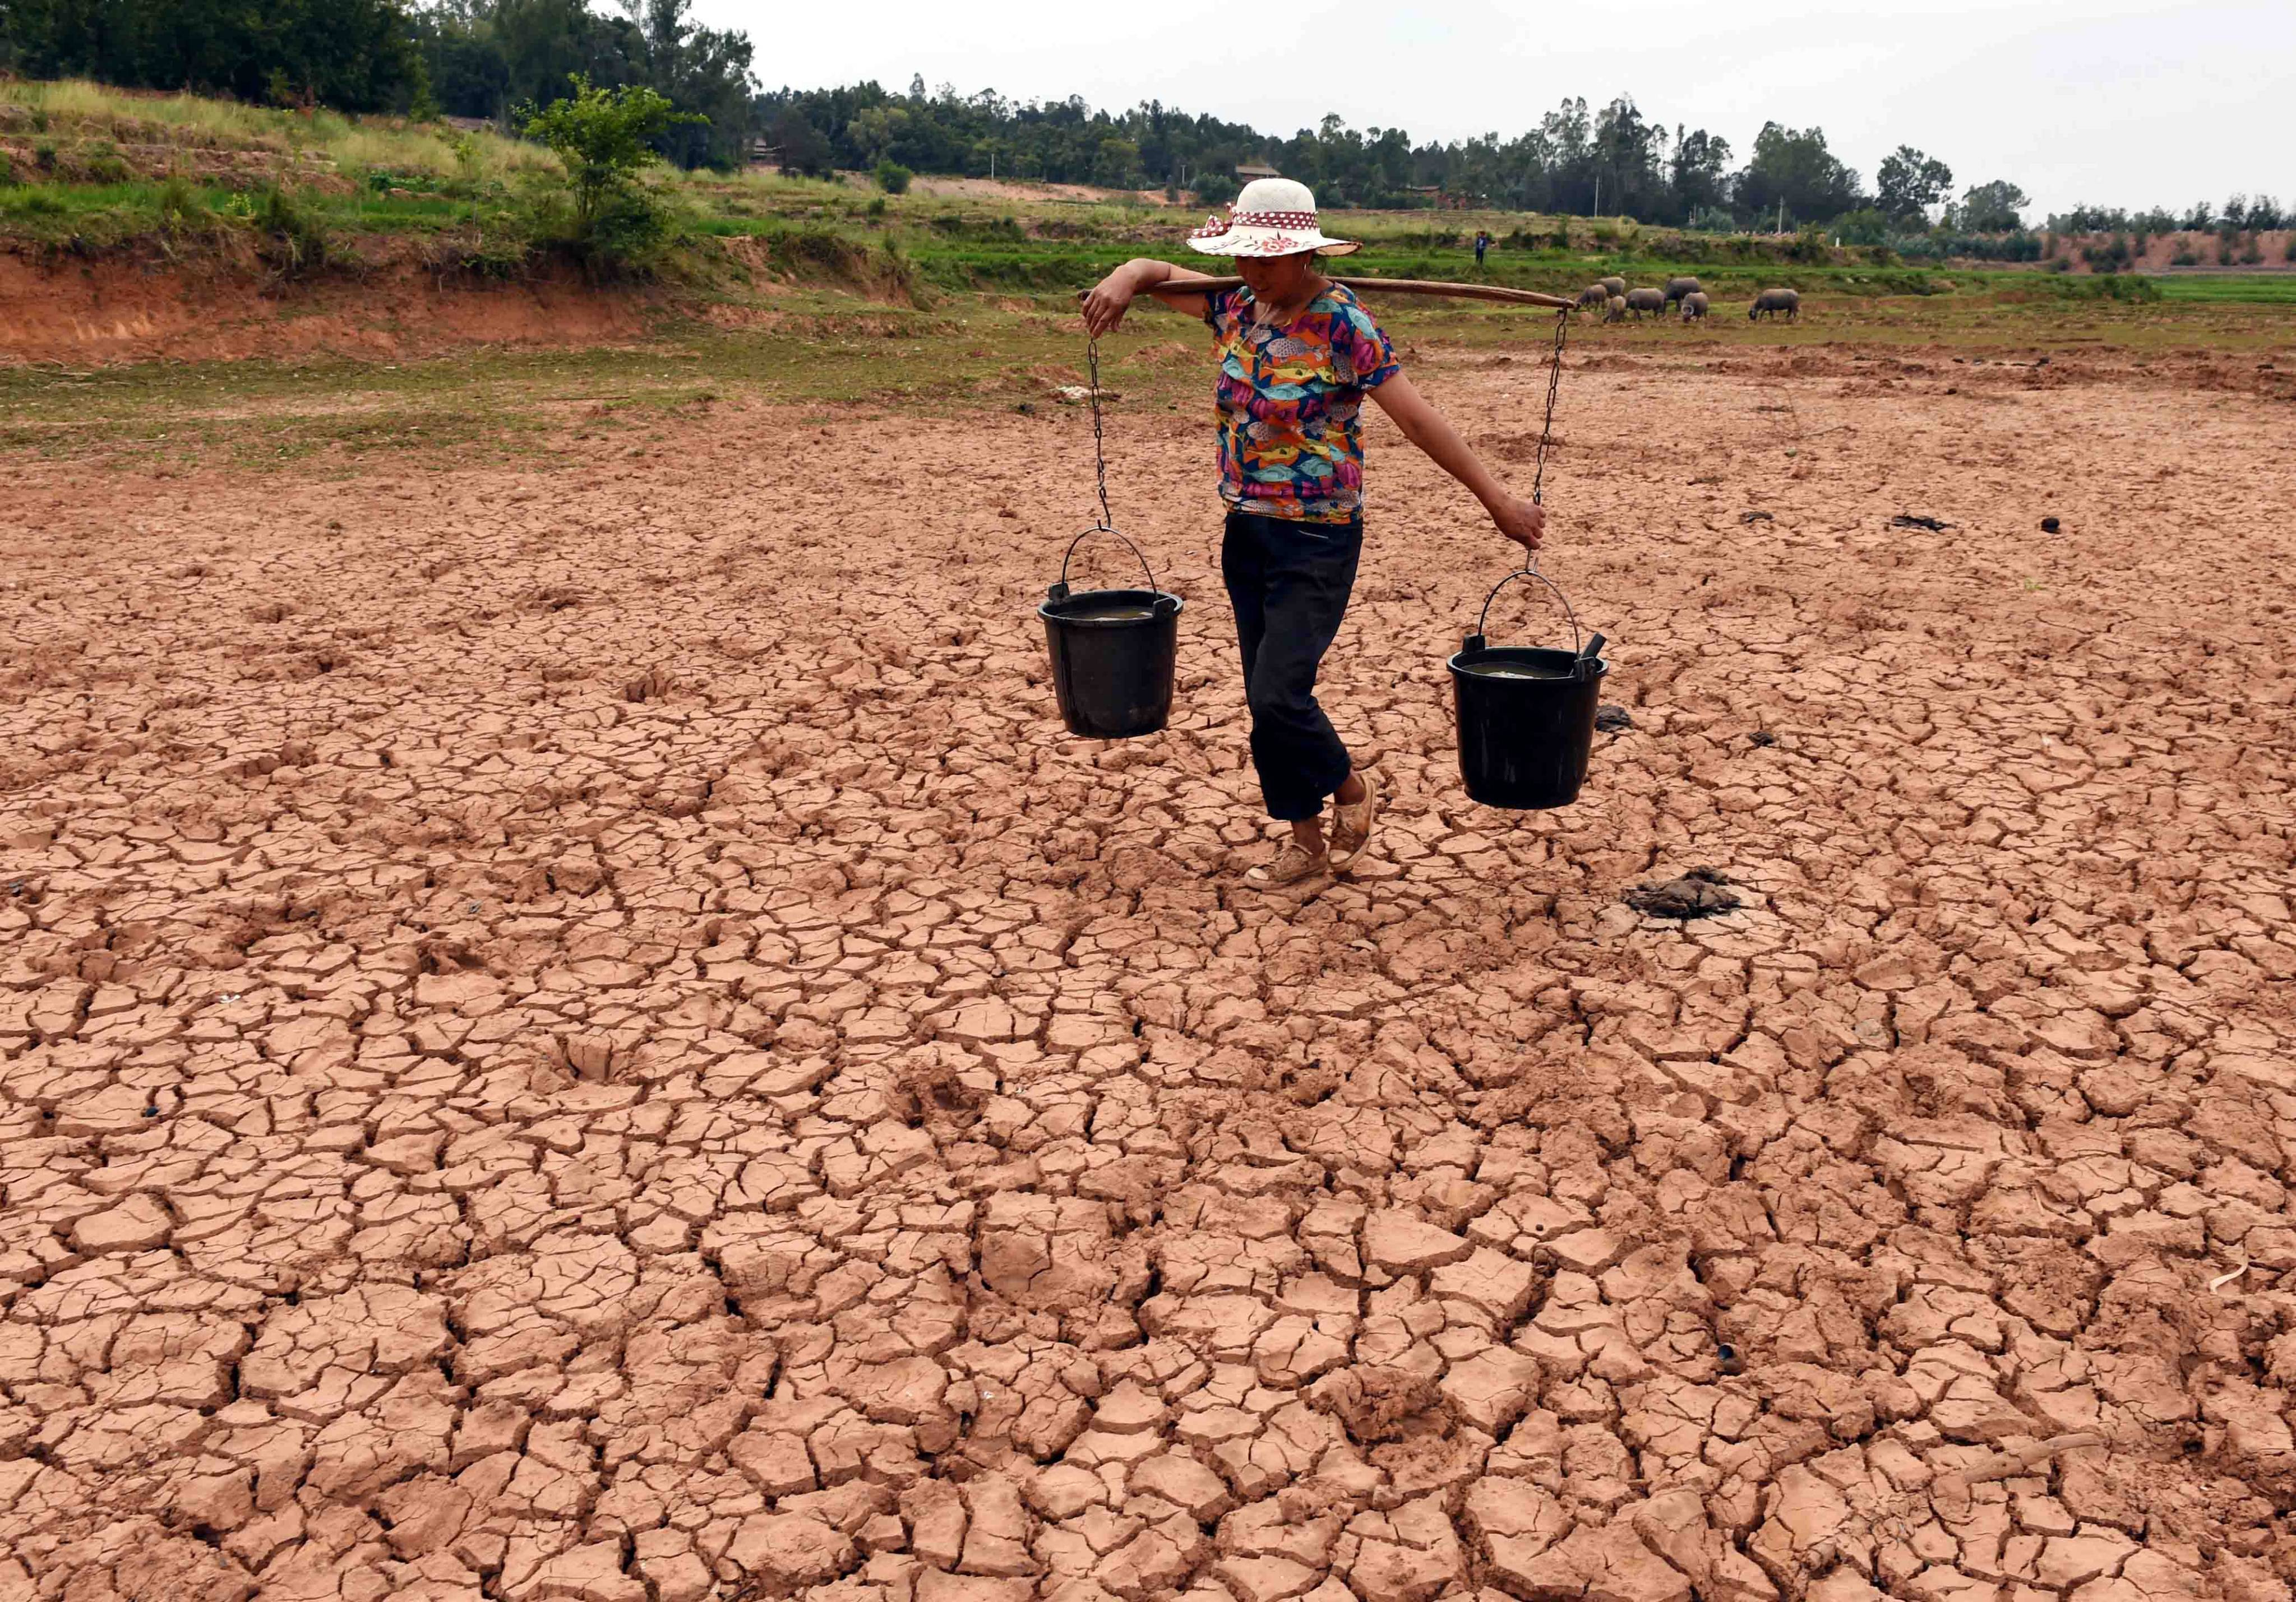 Yunnan is one of China’s leading hydropower producers, but it is facing ongoing challenges to its agriculture and energy systems due to the prolonged drought. Photo: Xinhua